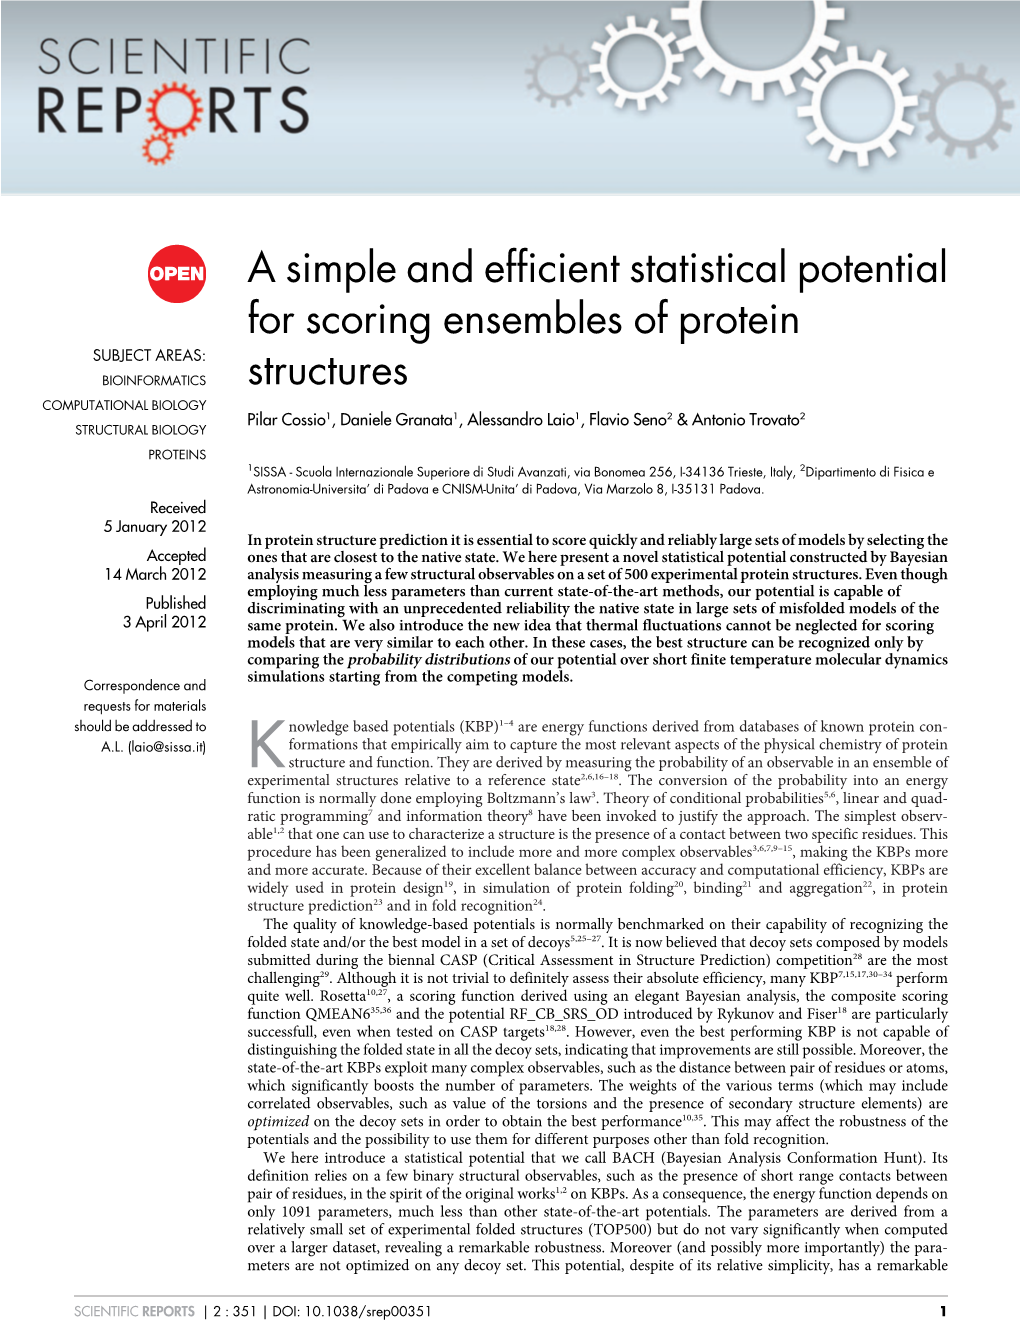 A Simple and Efficient Statistical Potential for Scoring Ensembles of Protein Structures